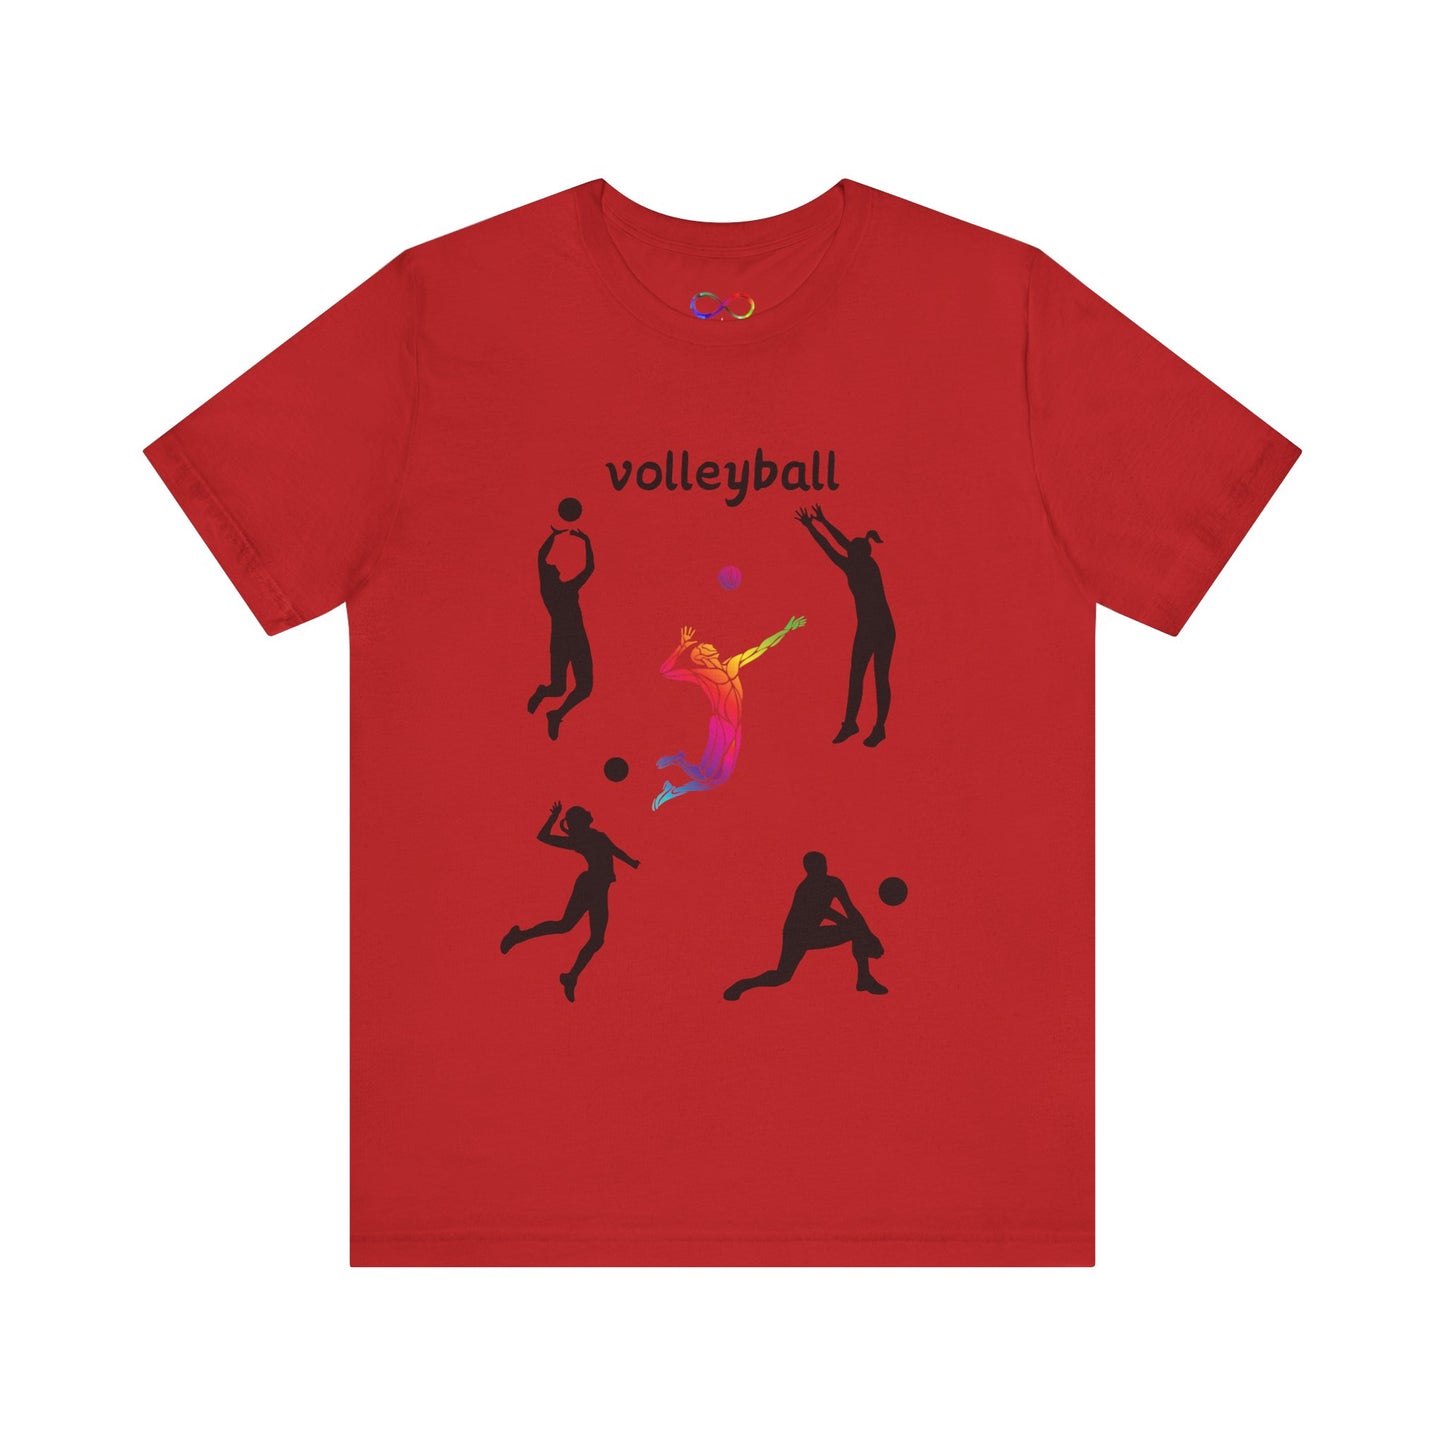 Volleyball t-shirts